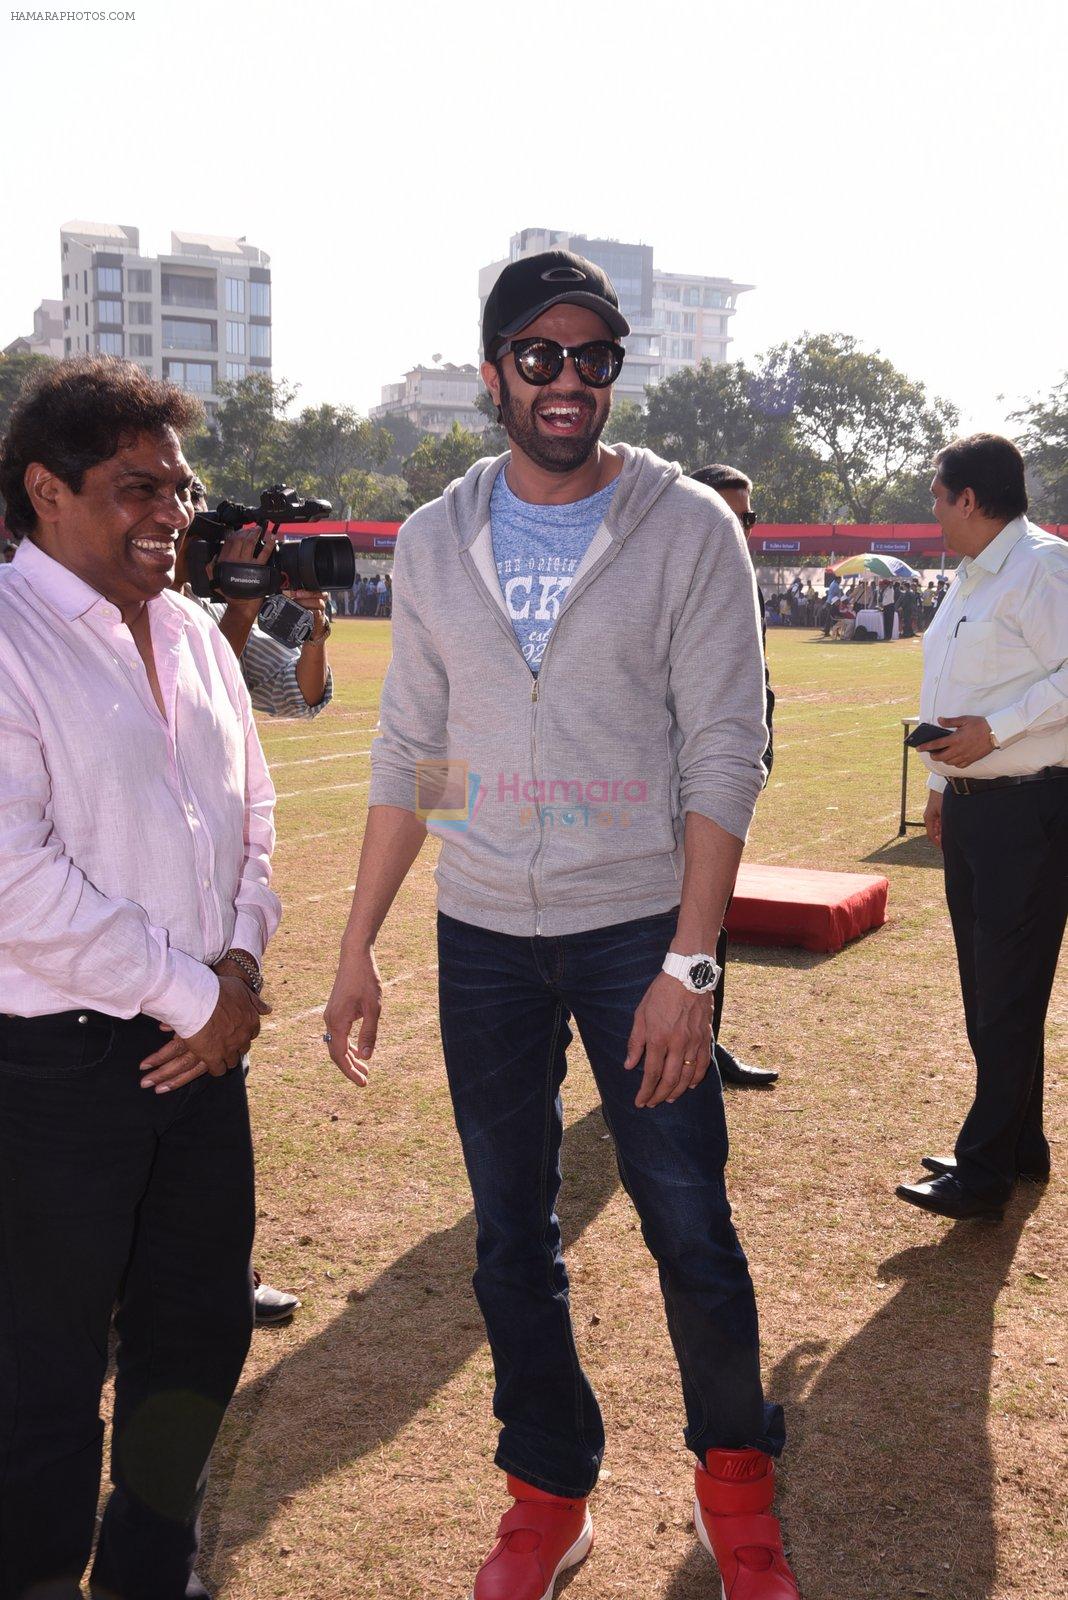 Johnny Lever, Manish Paul at Jamnabai school sports meet for special children on 19th Dec 2016